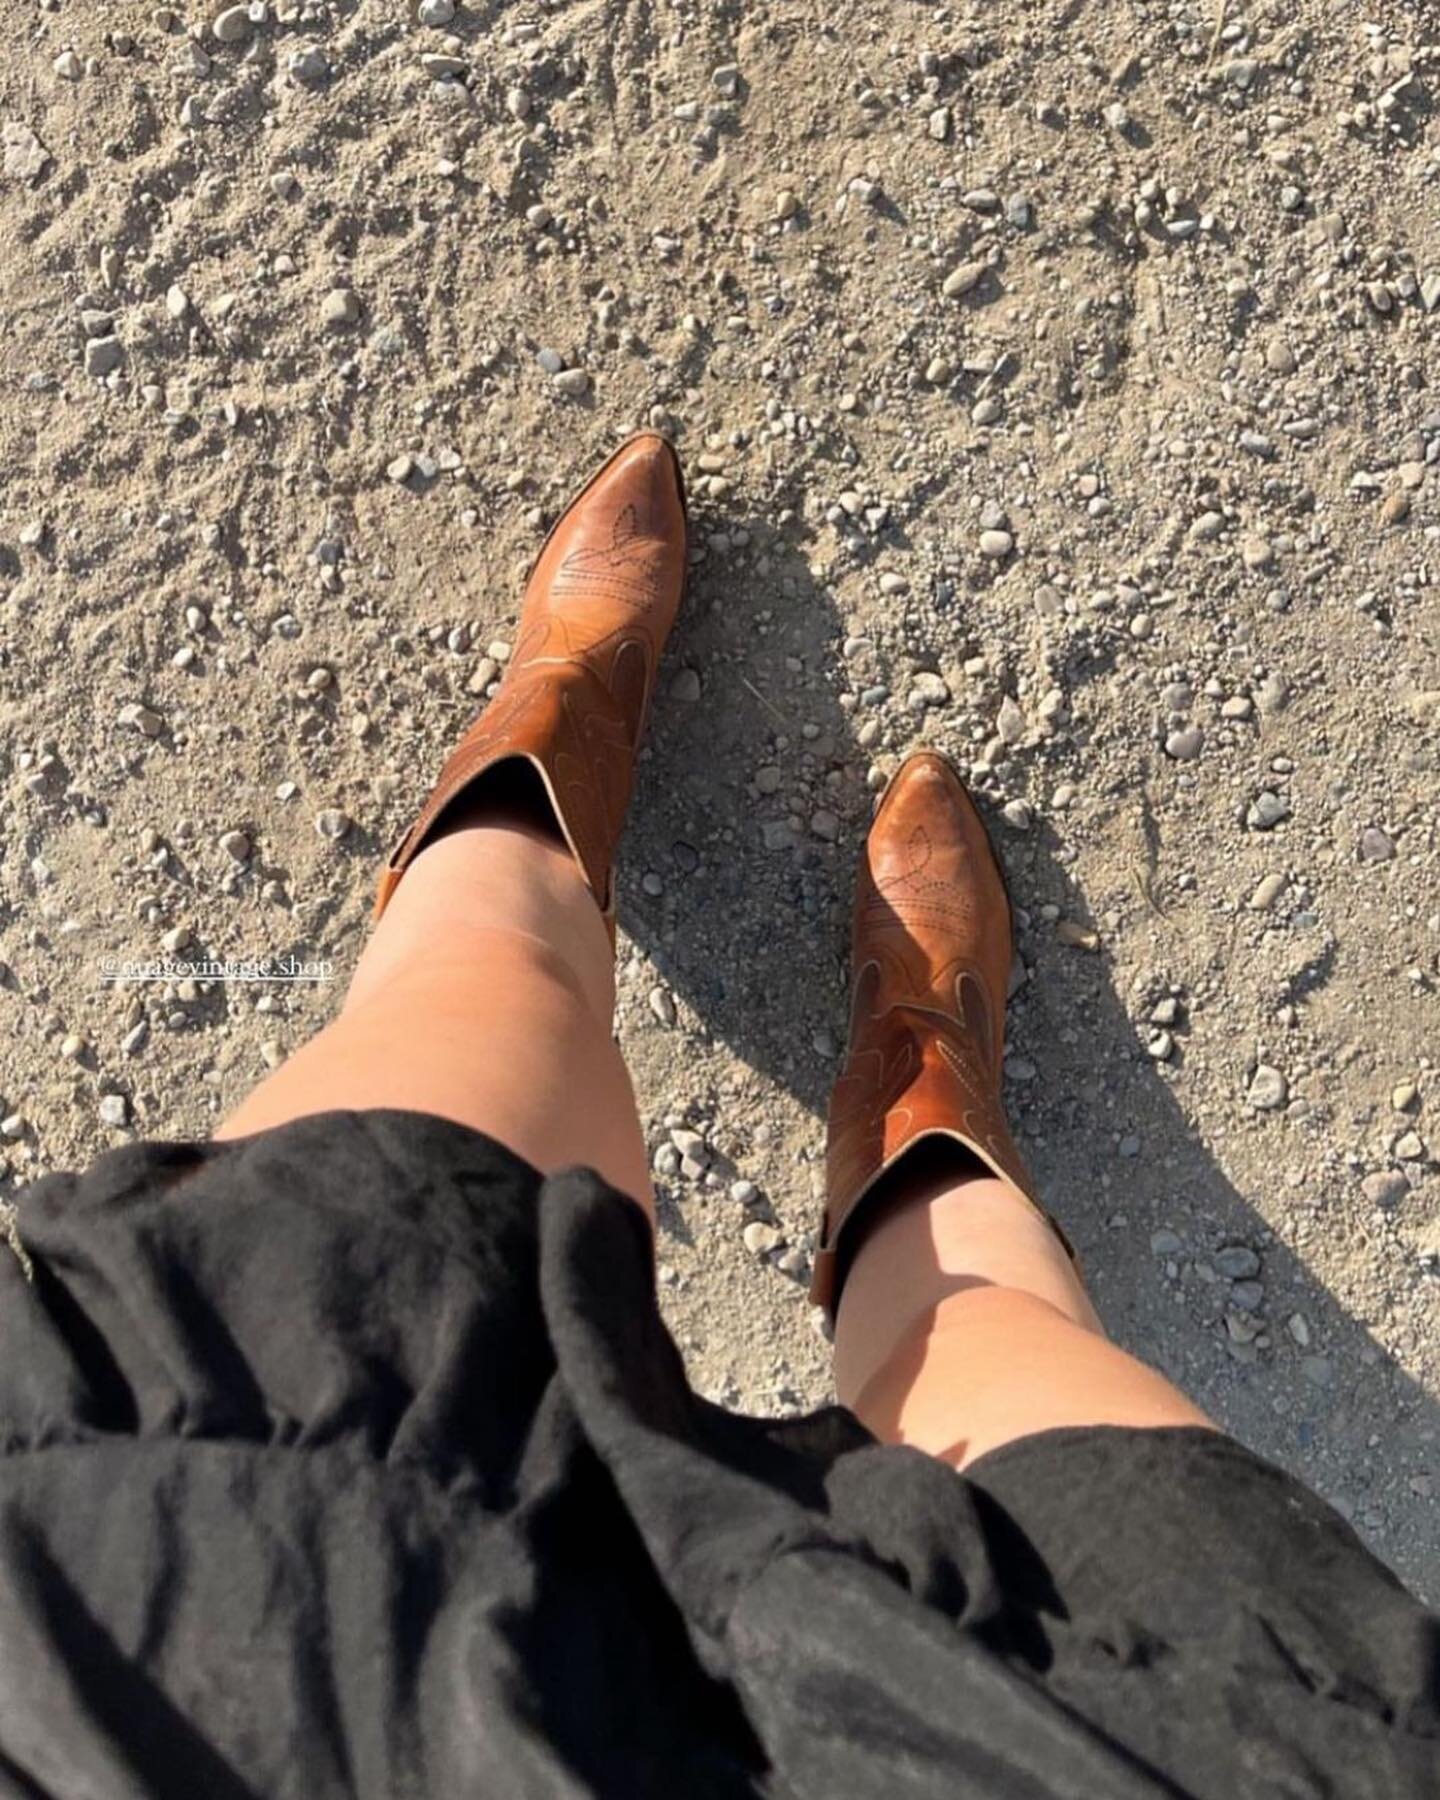 Give me a 🤠 of you're looking for a pair of cowboy boots!

Should I bring more to next week's @alleyways_mkt? Let me know! 🙌

Loving these pics of @sweatwithjosee in the boots she picked up at a Nuage pop up last summer! ❤️